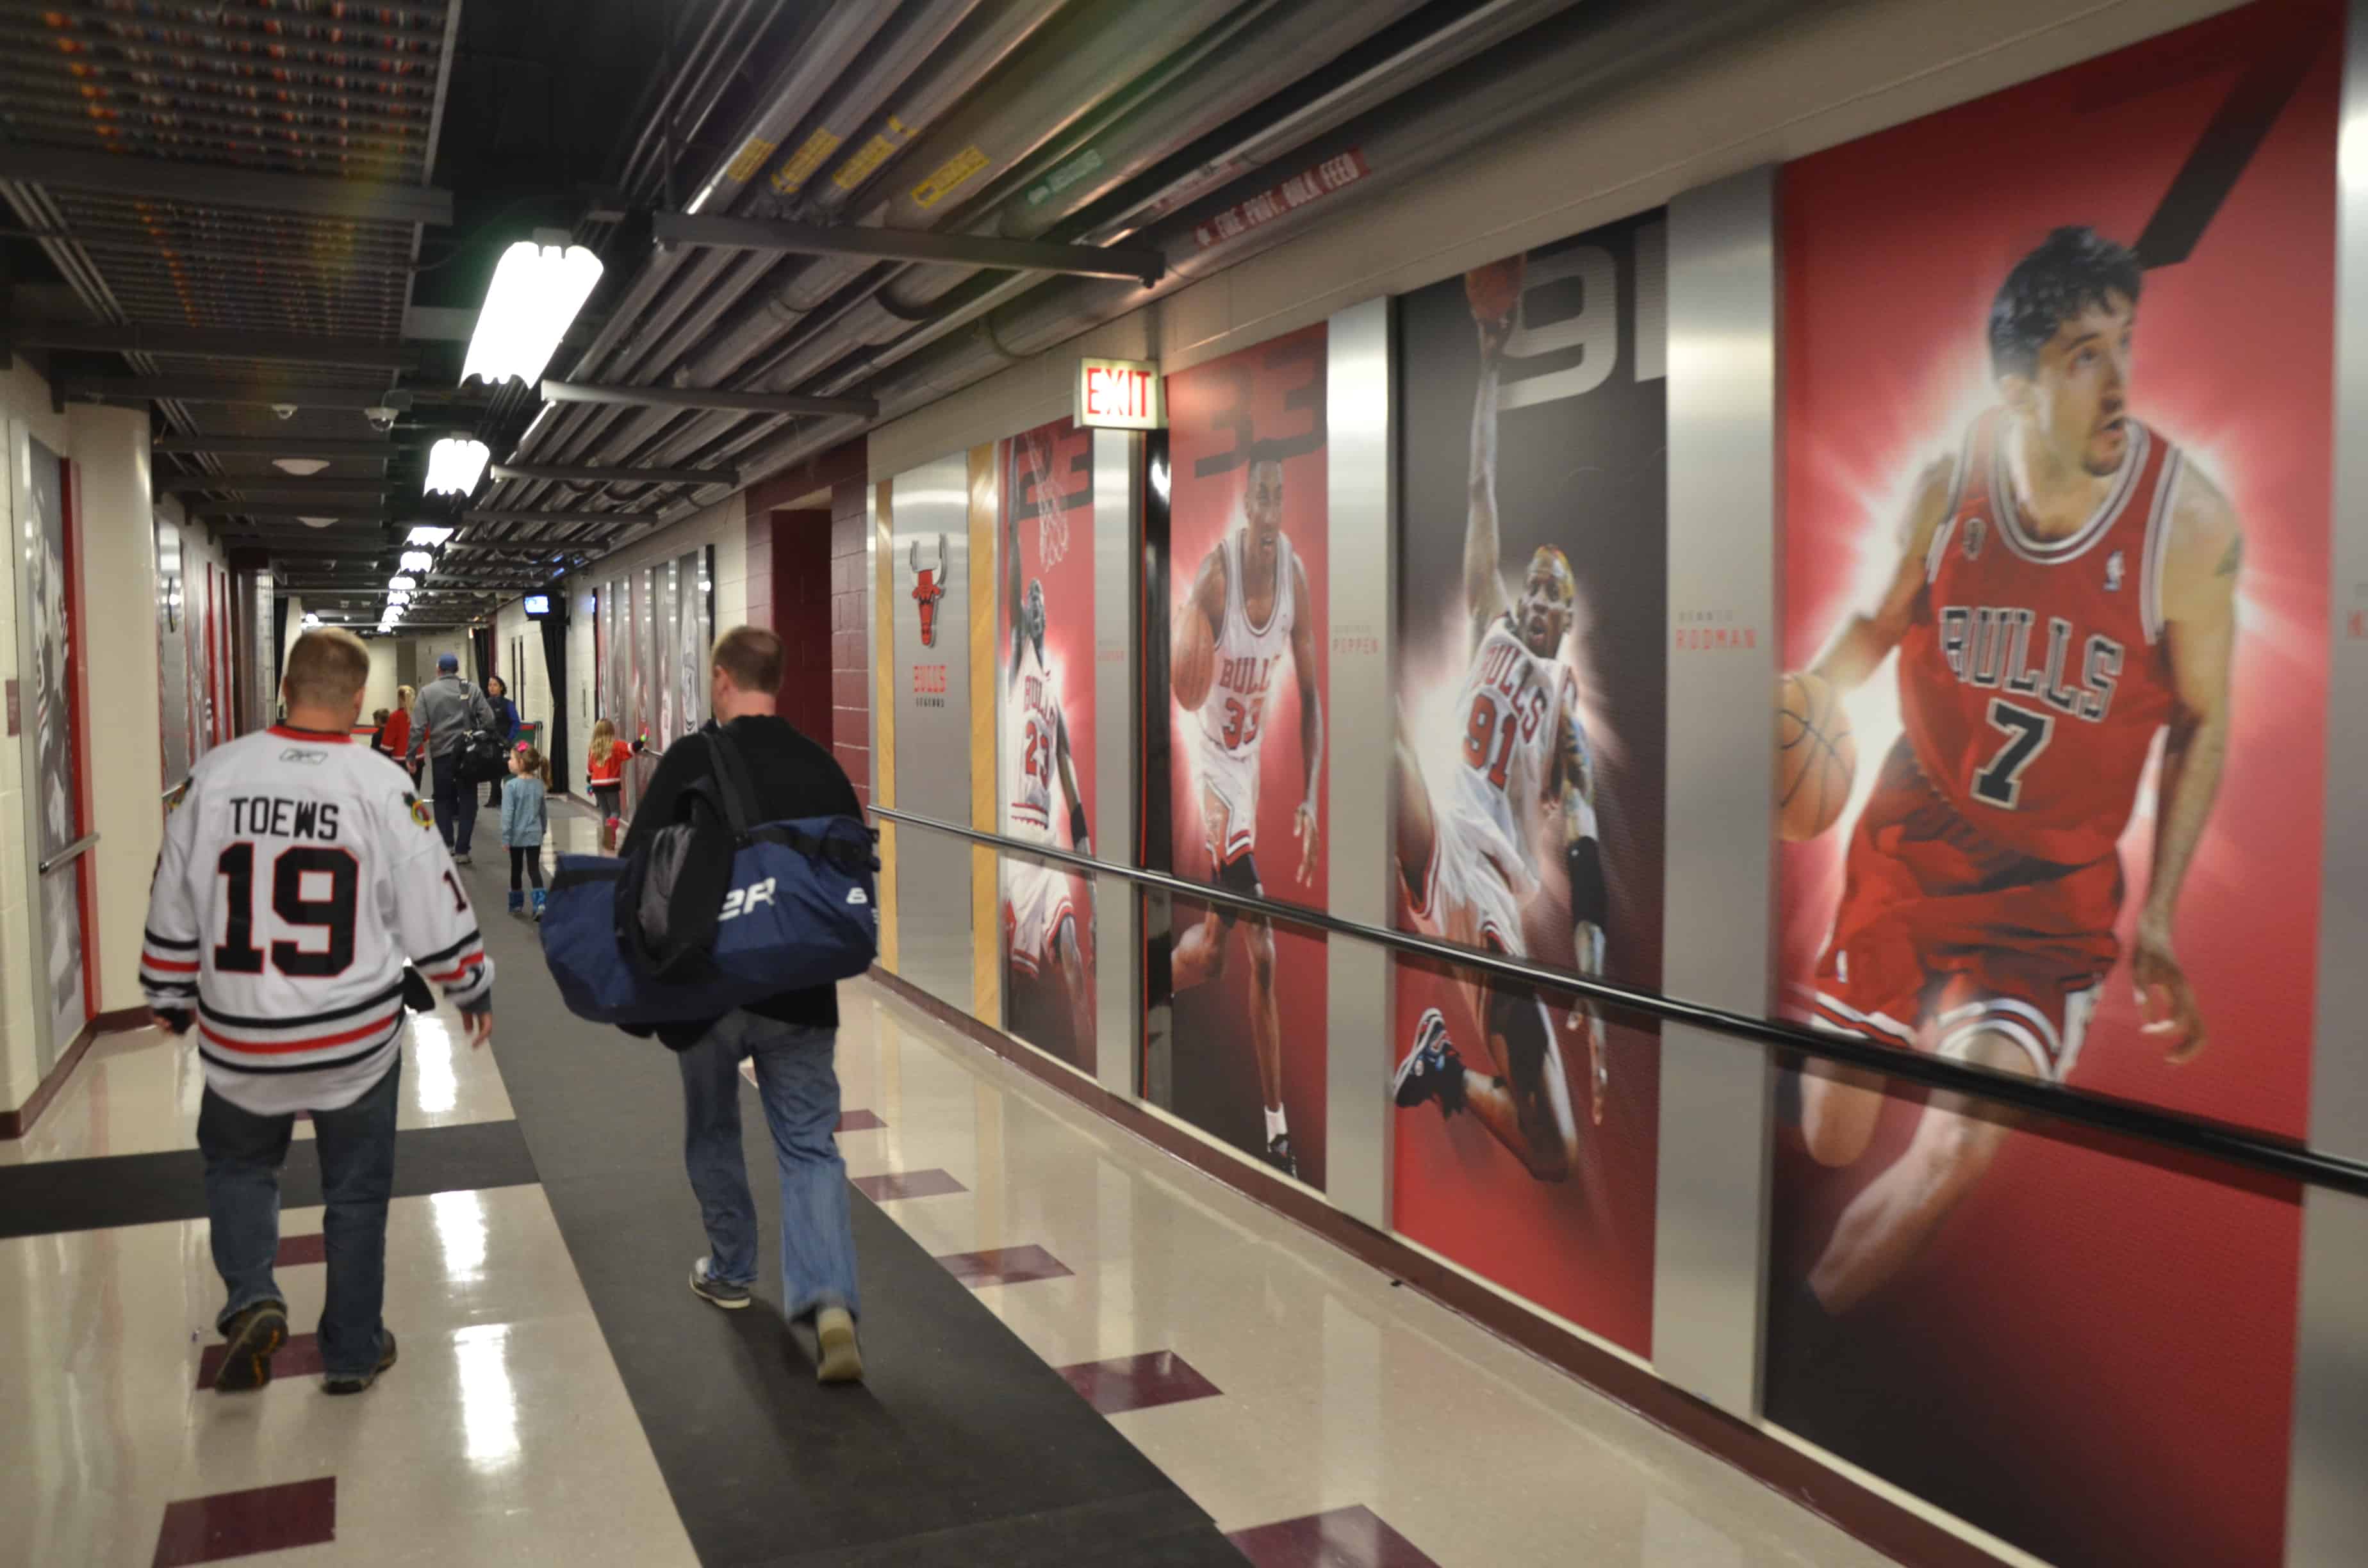 Hallway at the United Center